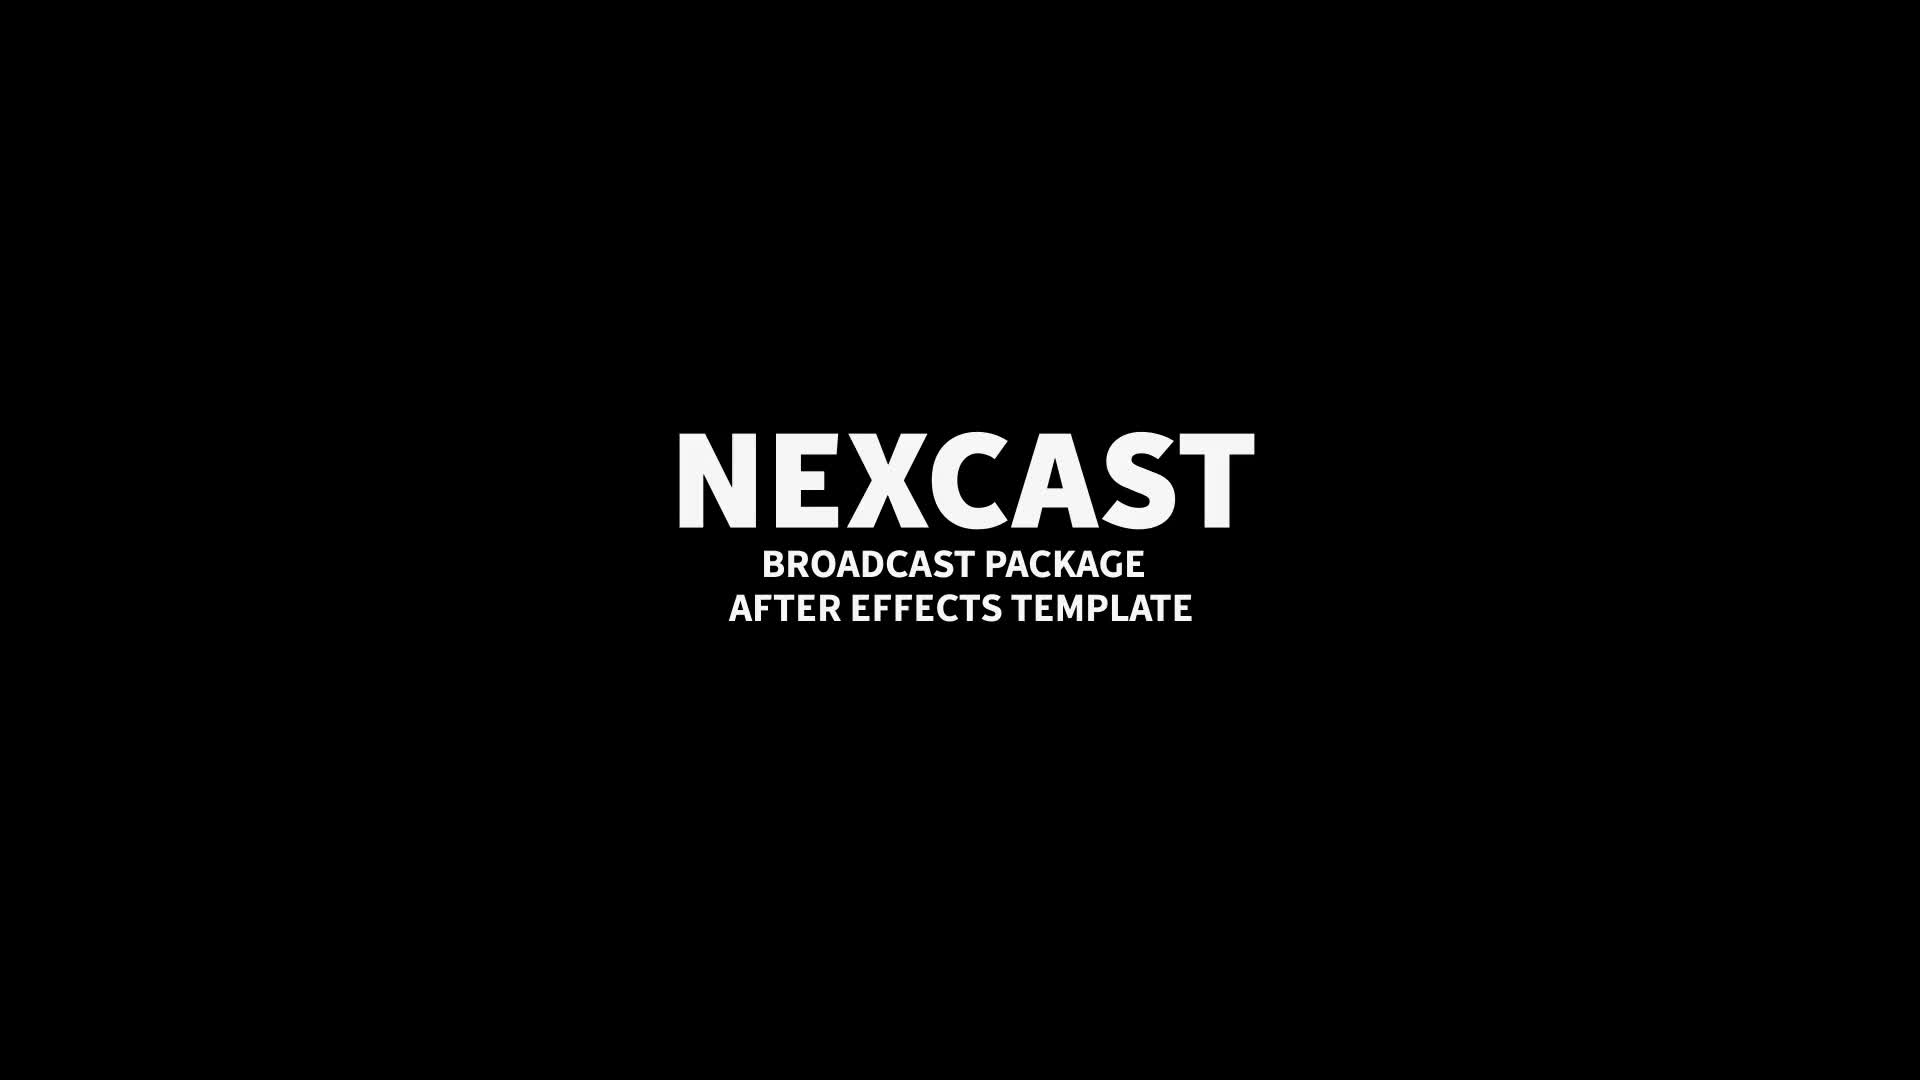 nexcast after effects broadcast package free download